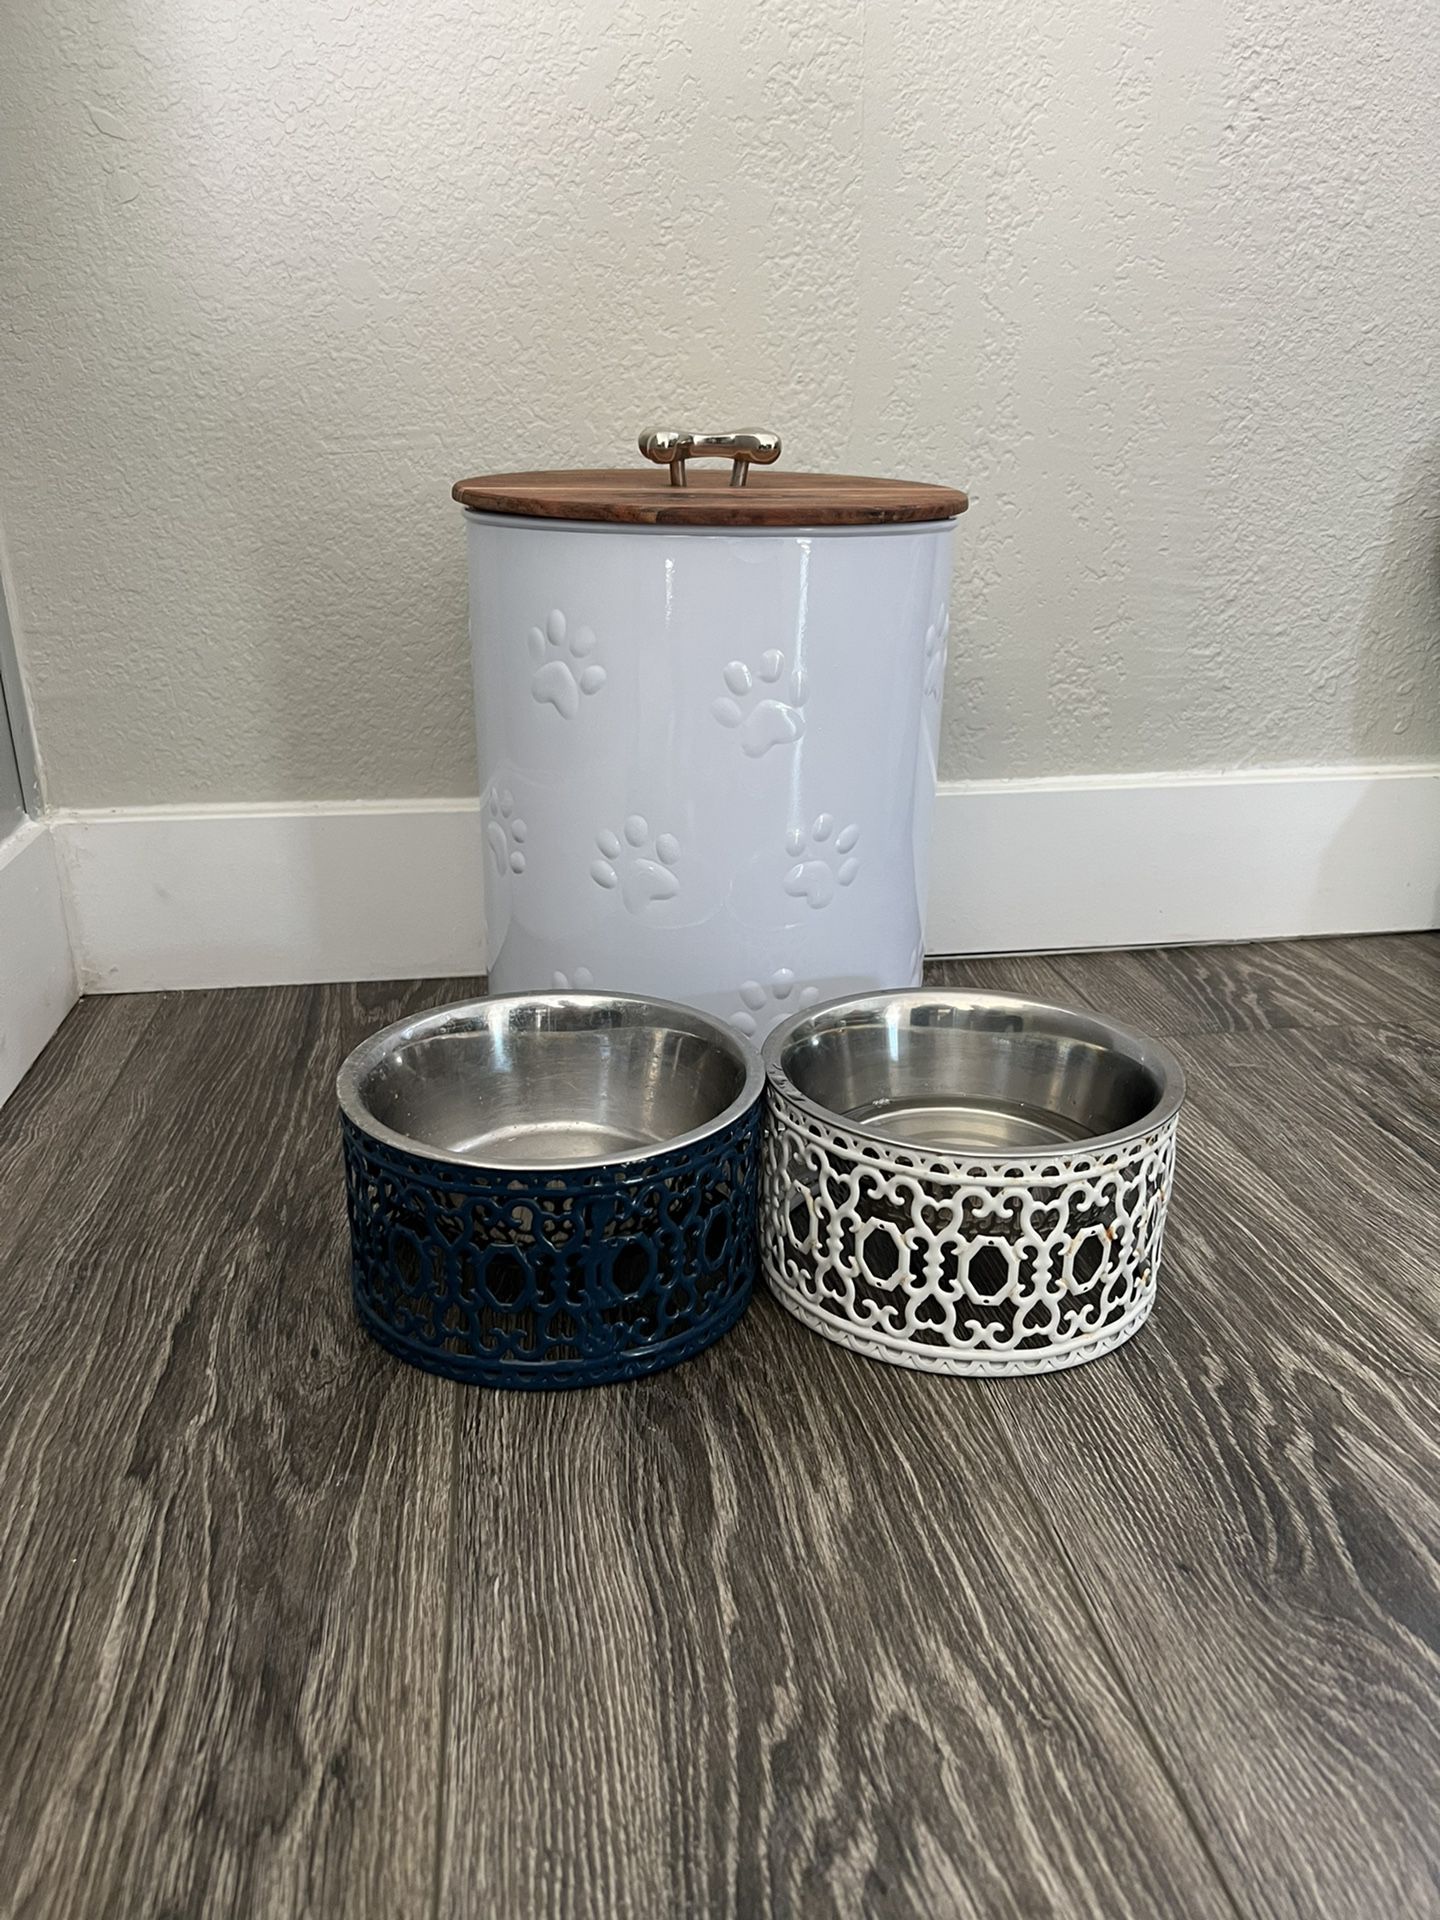 Pet Food And Water Bowls And Food Container